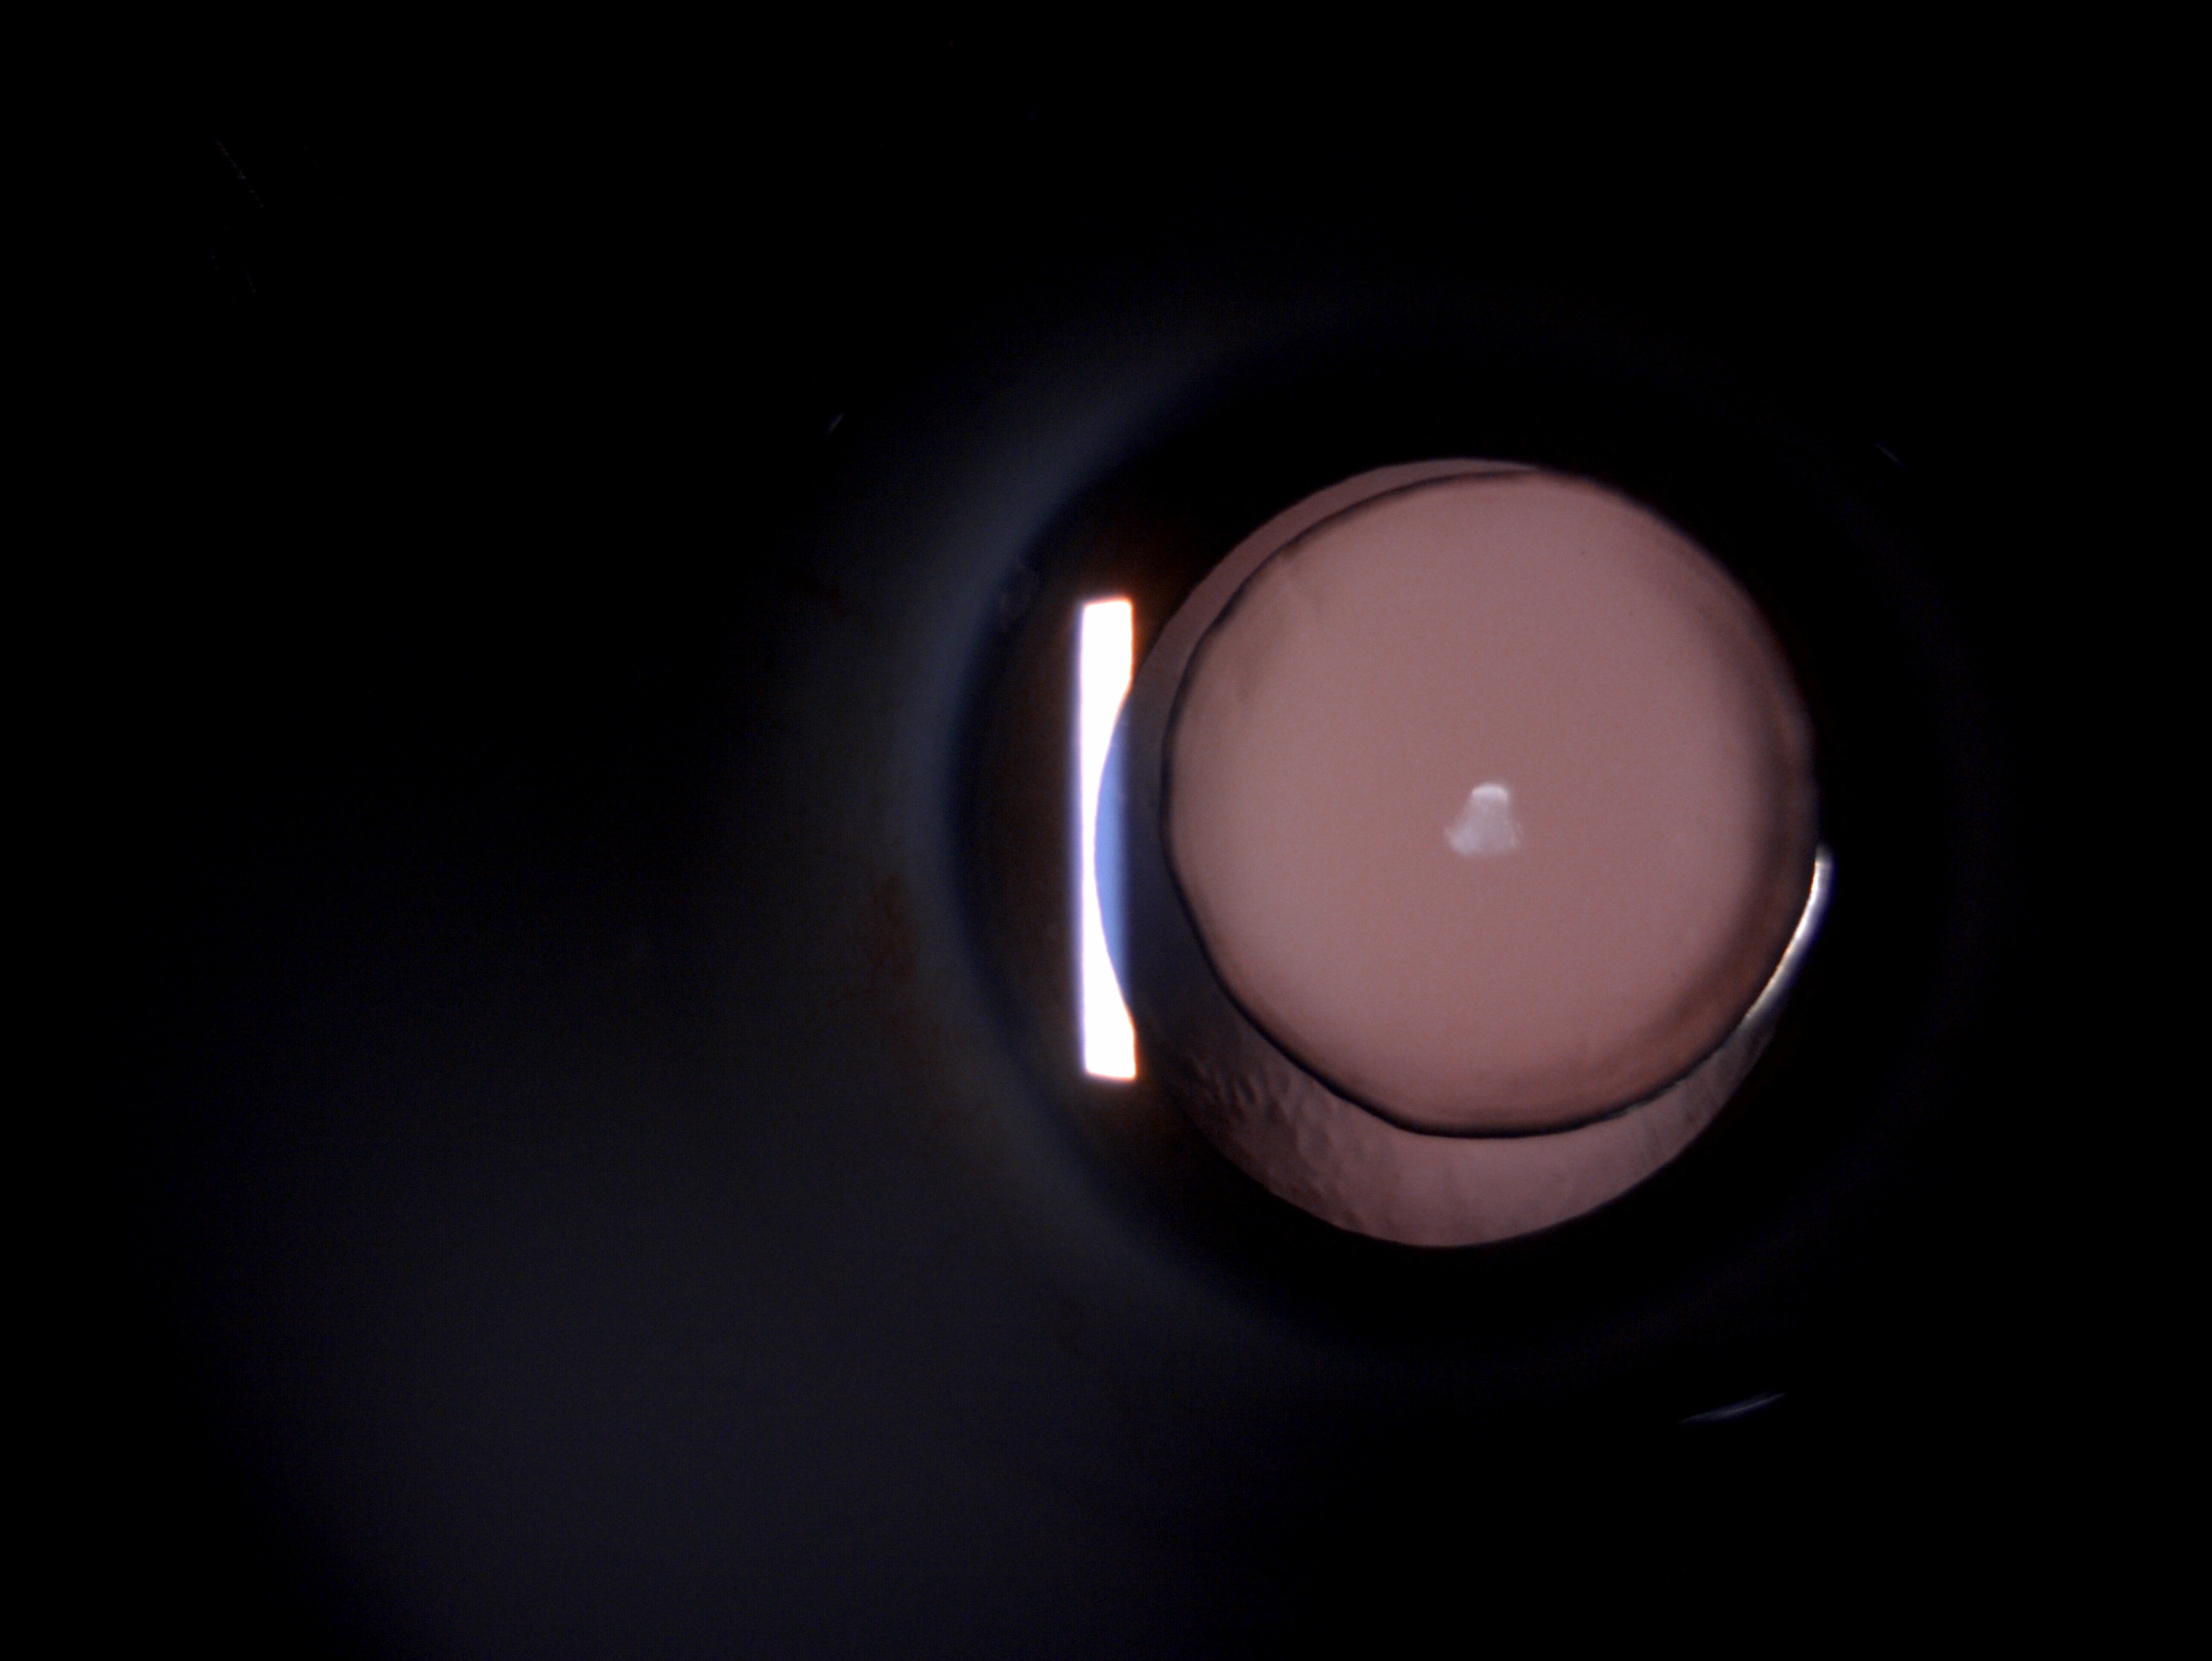 Slit lamp image of the patient depicting microspherophakic lens with ectopia lentis in a patient with Weill-Marchesani syndrome